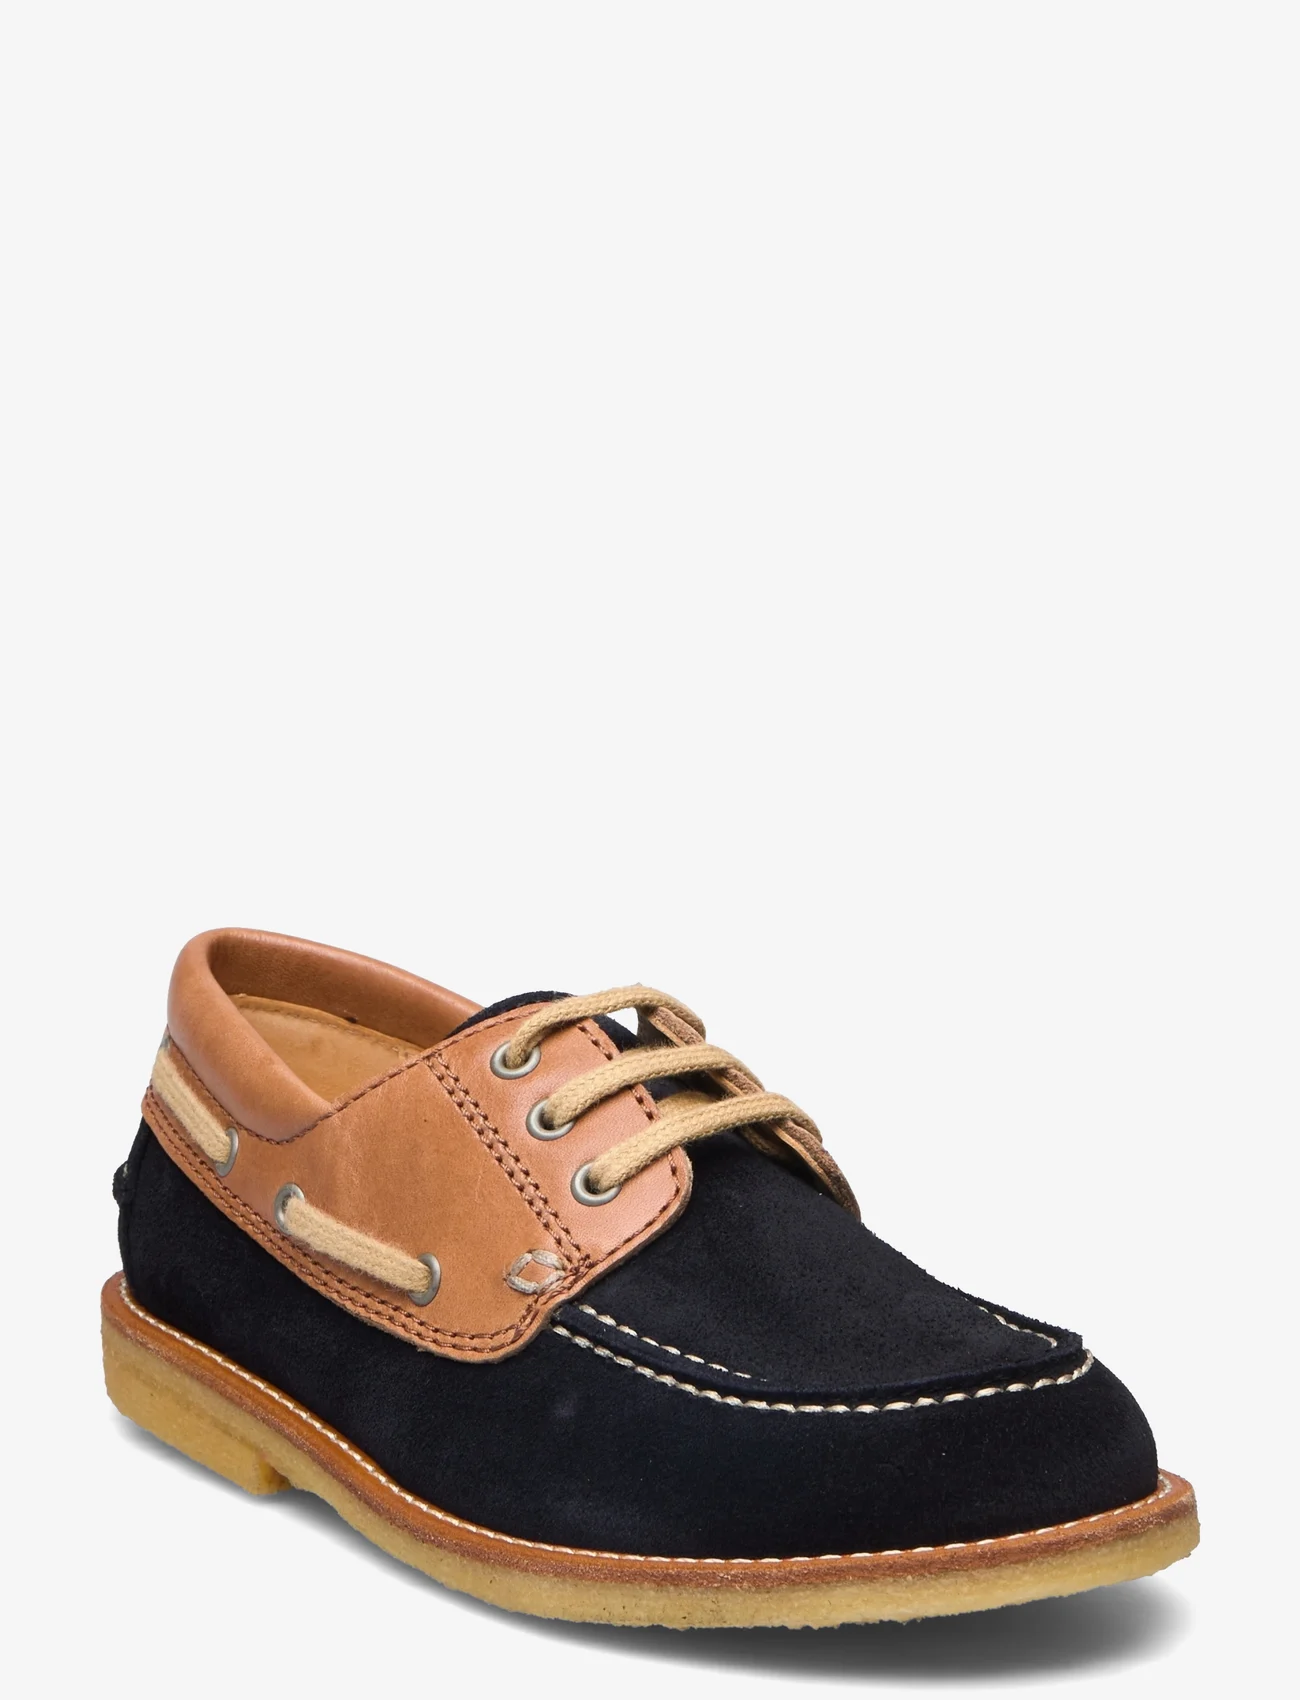 ANGULUS - Shoes - flat - with lace - lapsed - 2215/1789 navy/cognac - 0